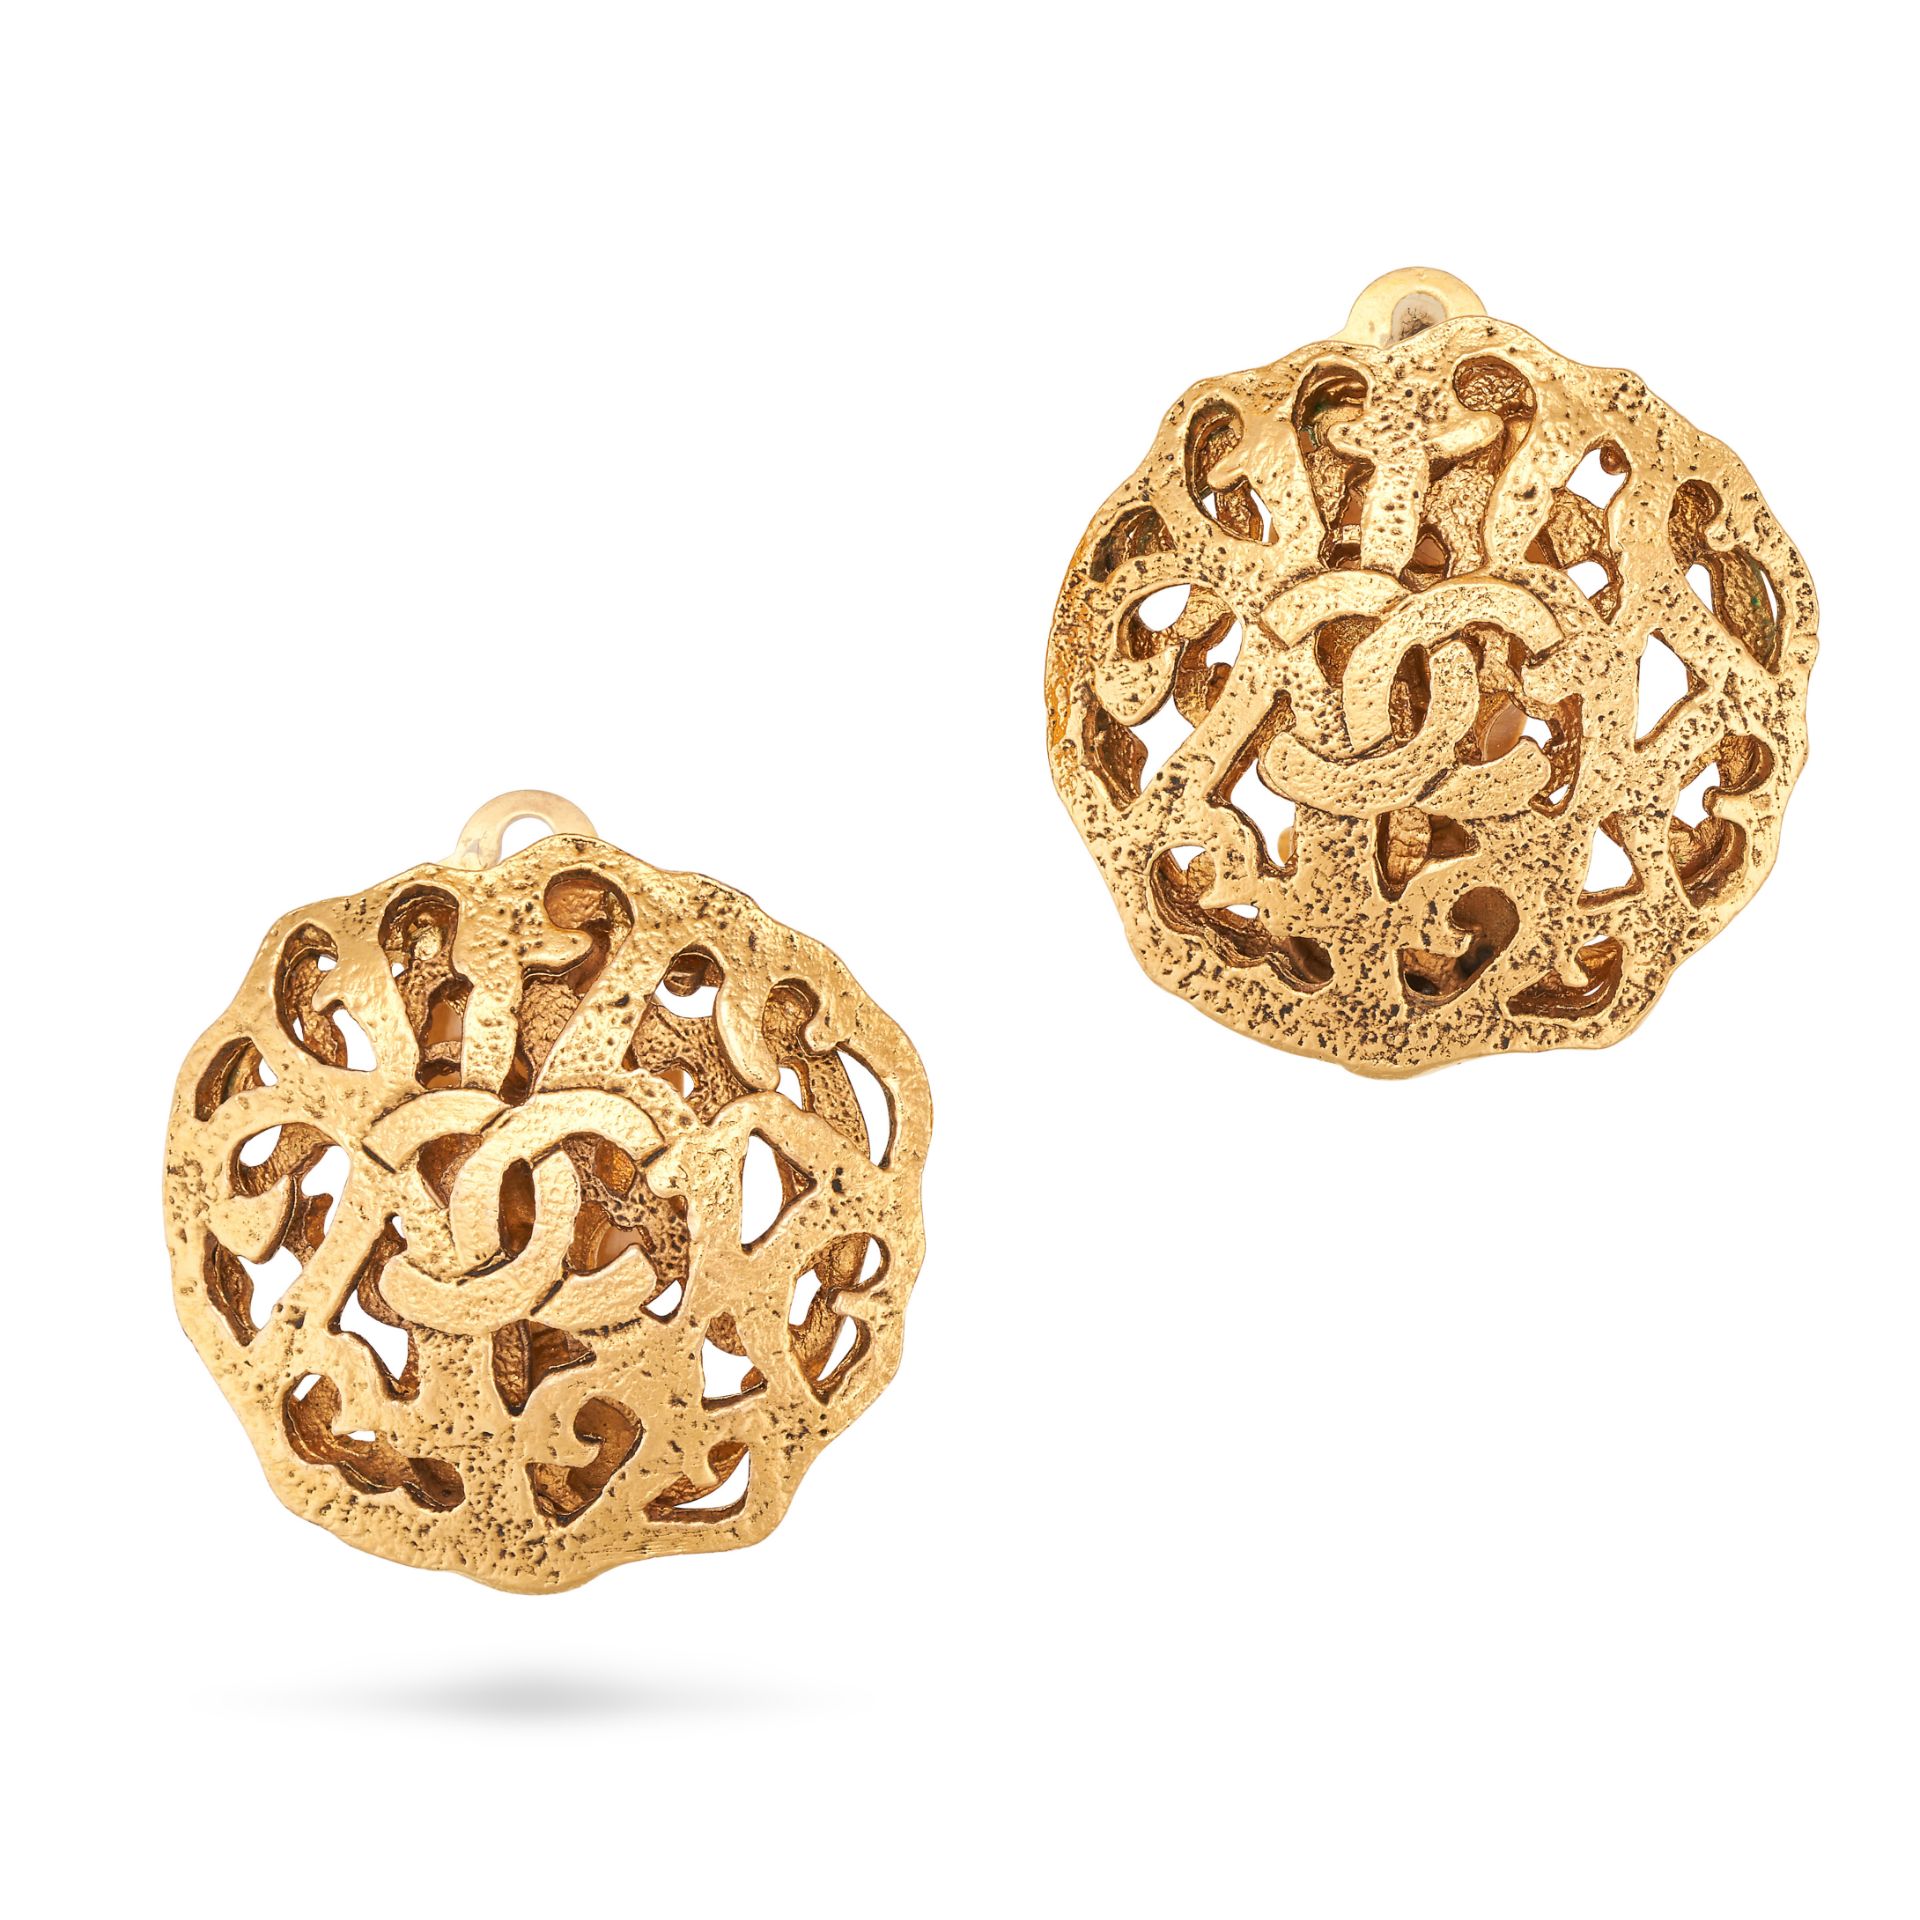 NO RESERVE - CHANEL, A PAIR OF VINTAGE CLIP EARRINGS each in abstract design with the interlockin...